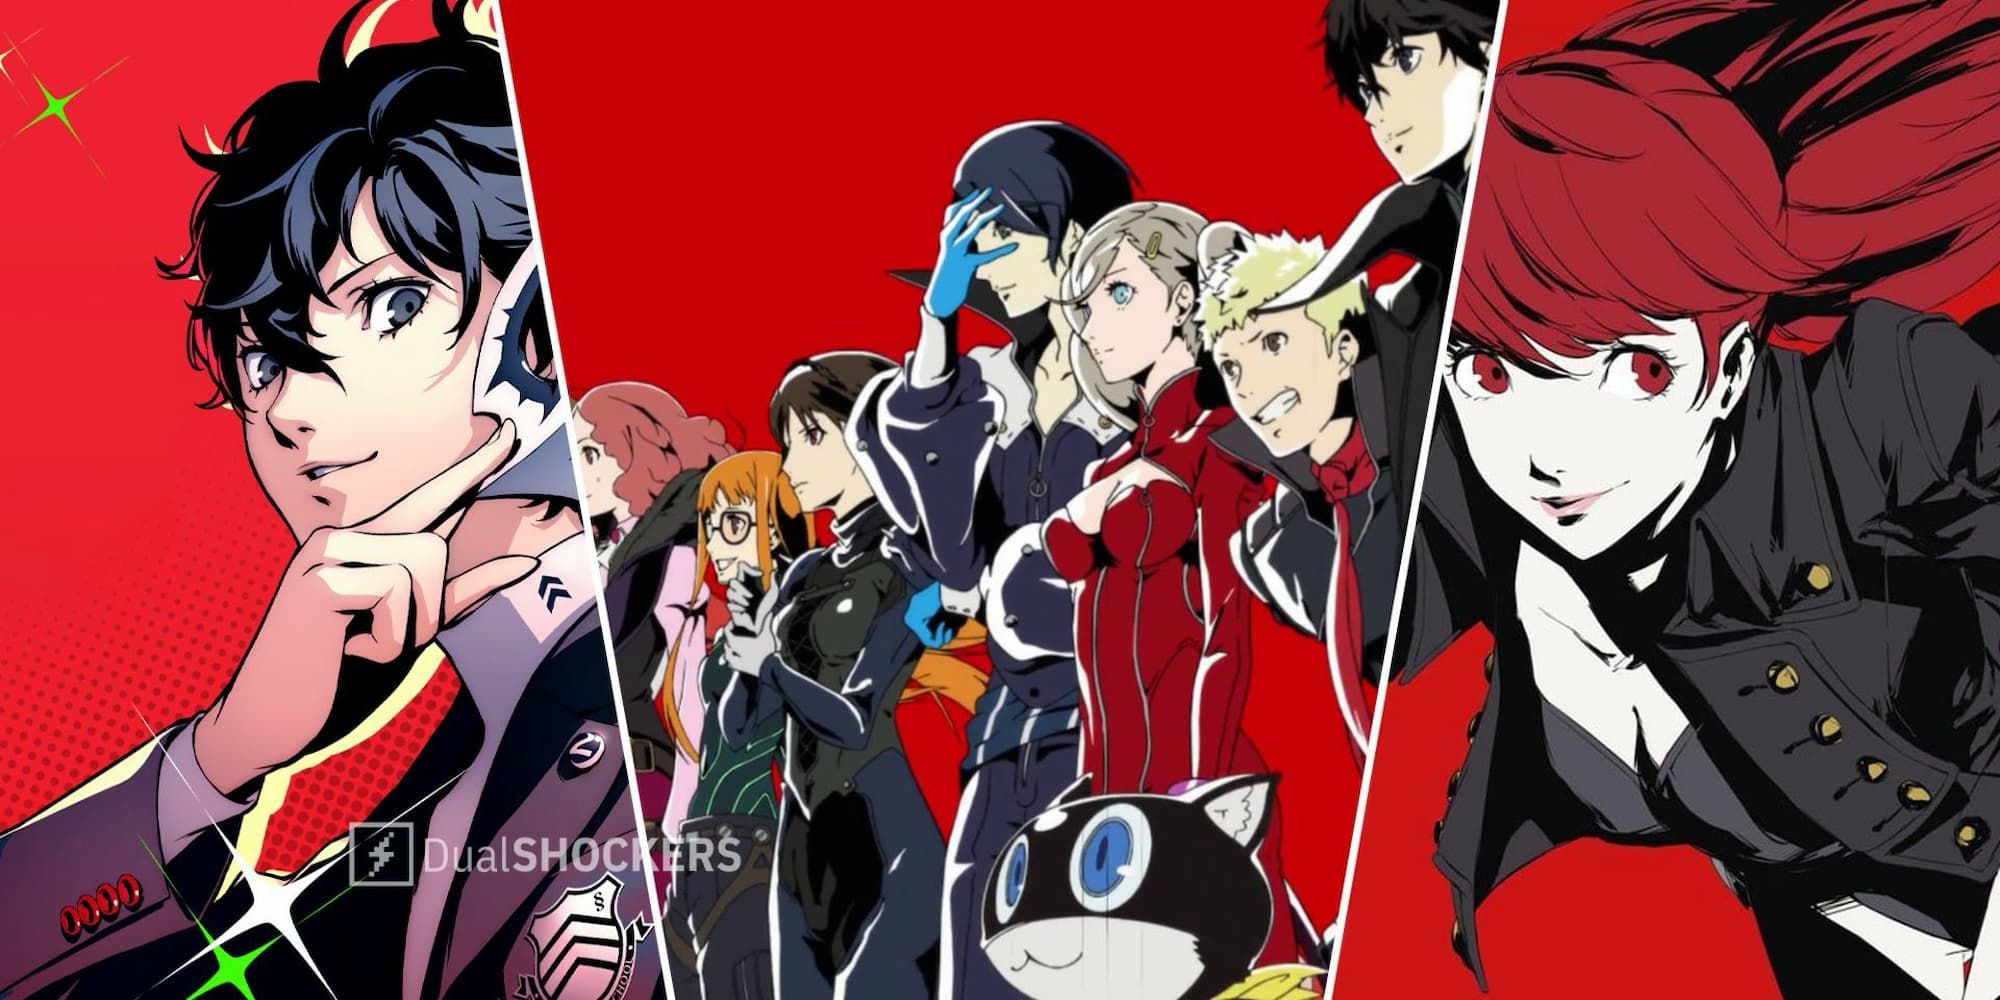 Persona 5 Royal: Is It Worth It?